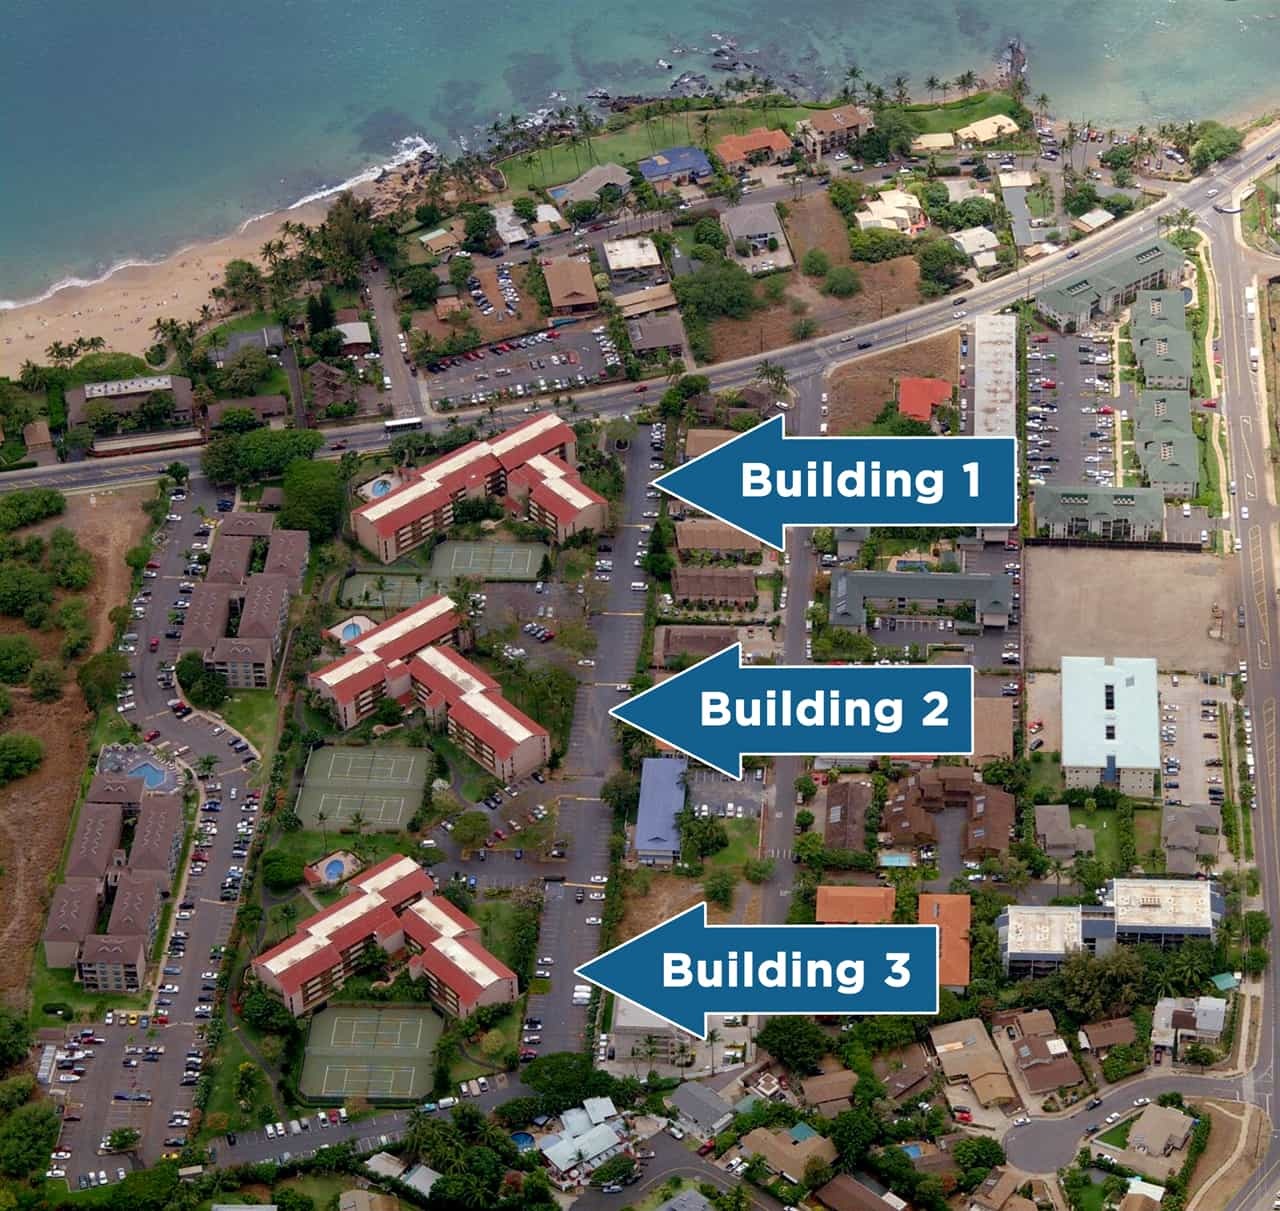 Building 1 is located closest to South Kihei Road